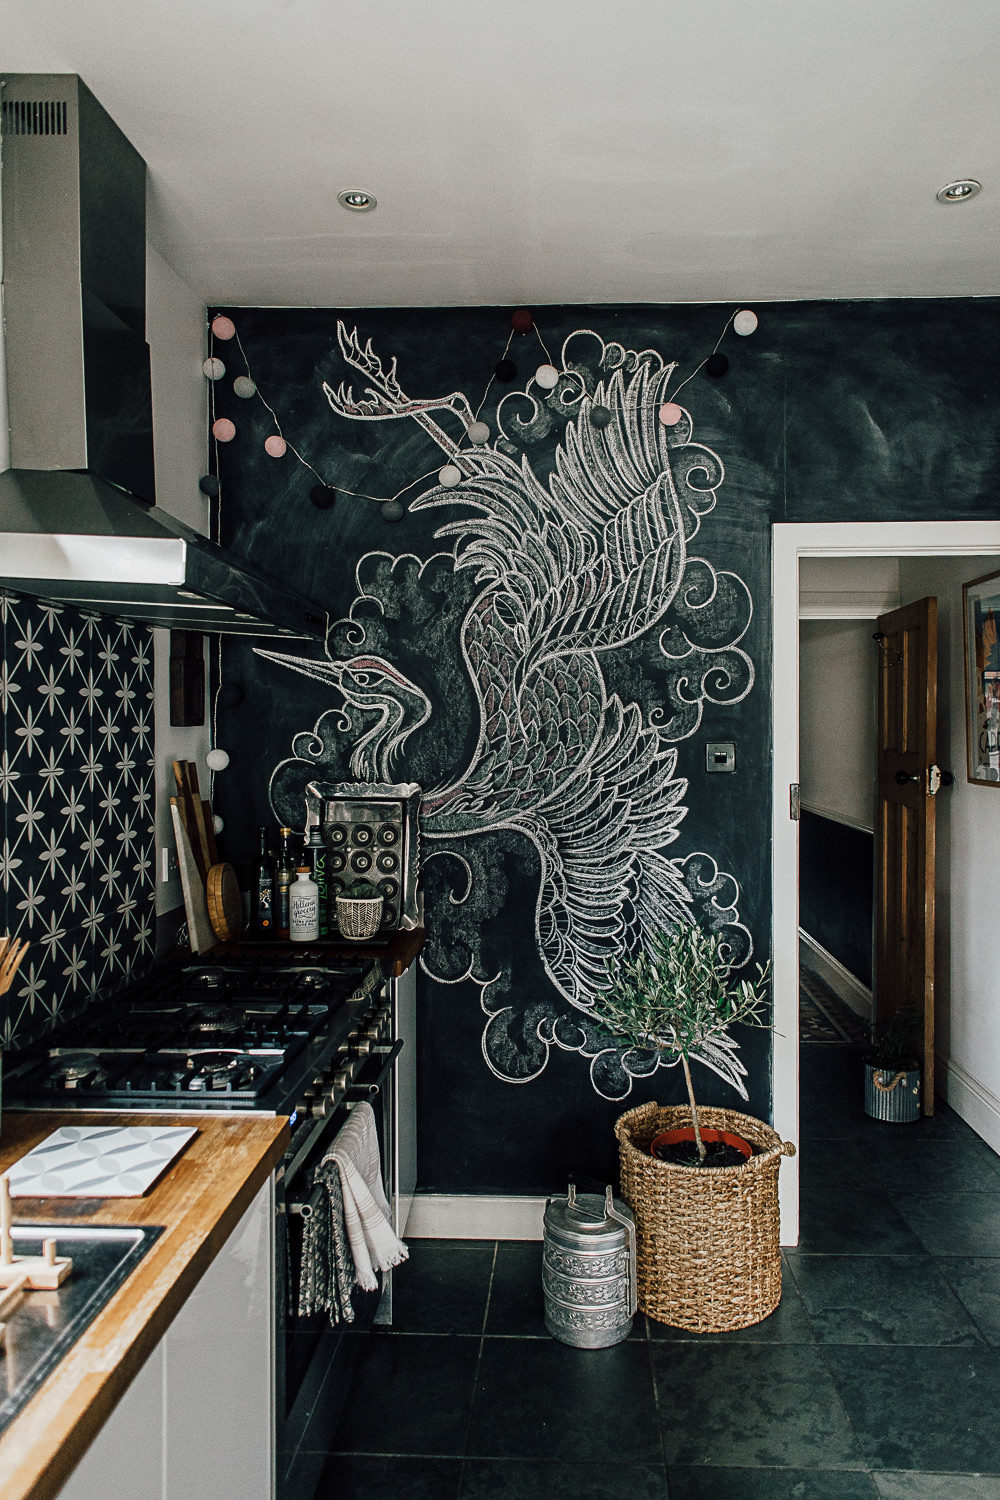 Blackboard paint on kitchen wall with hand drawn illustrations